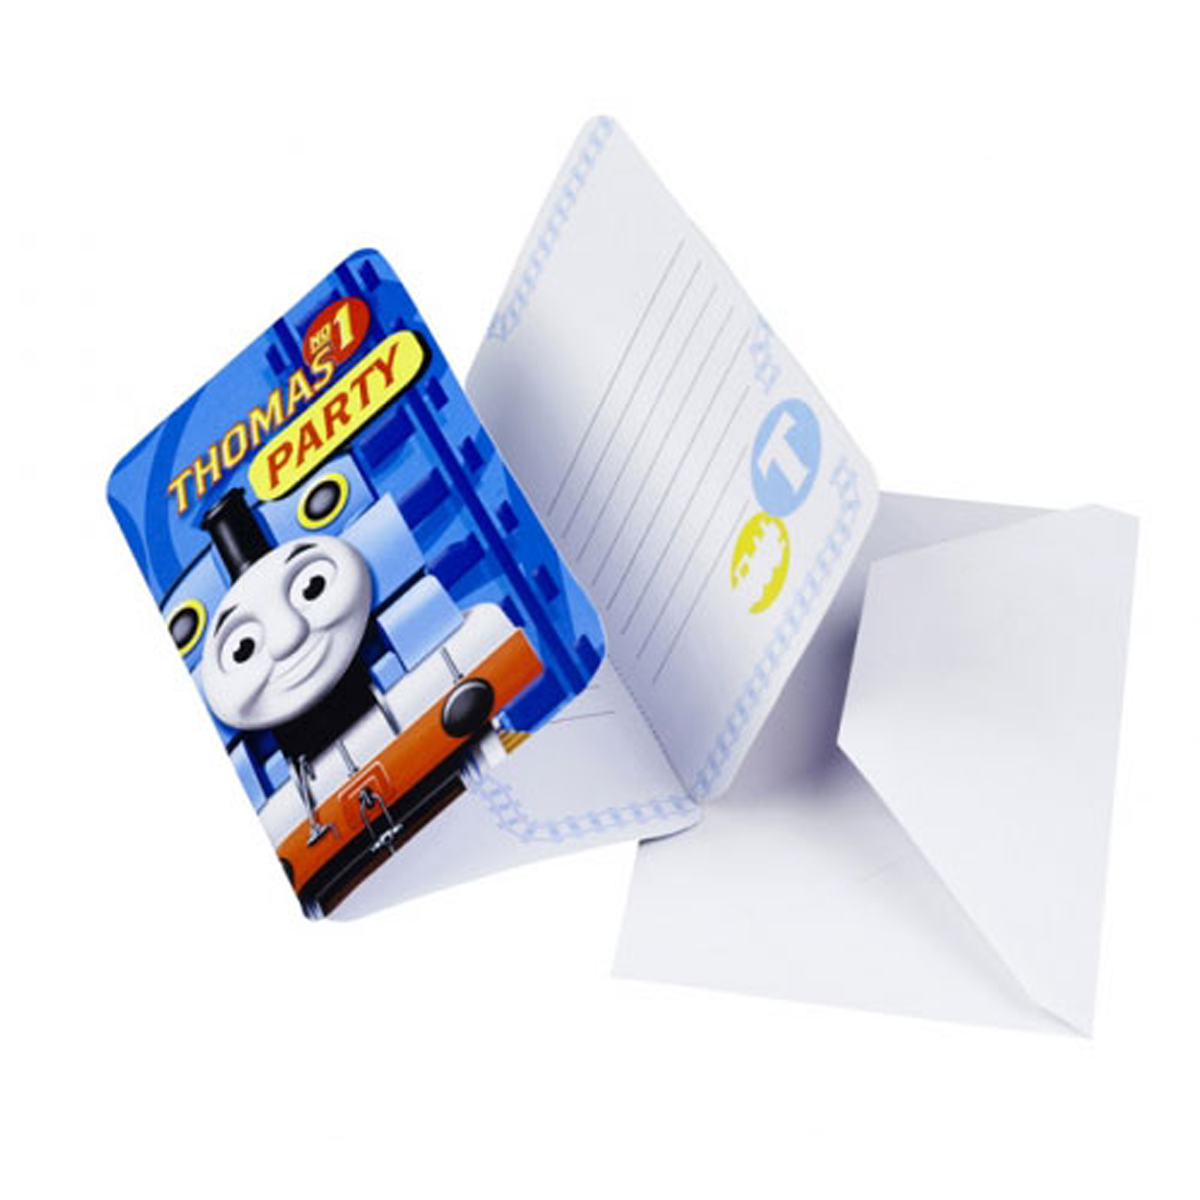 Thomas And Friends Invitations And Envelopes 6pcs Party Accessories - Party Centre - Party Centre